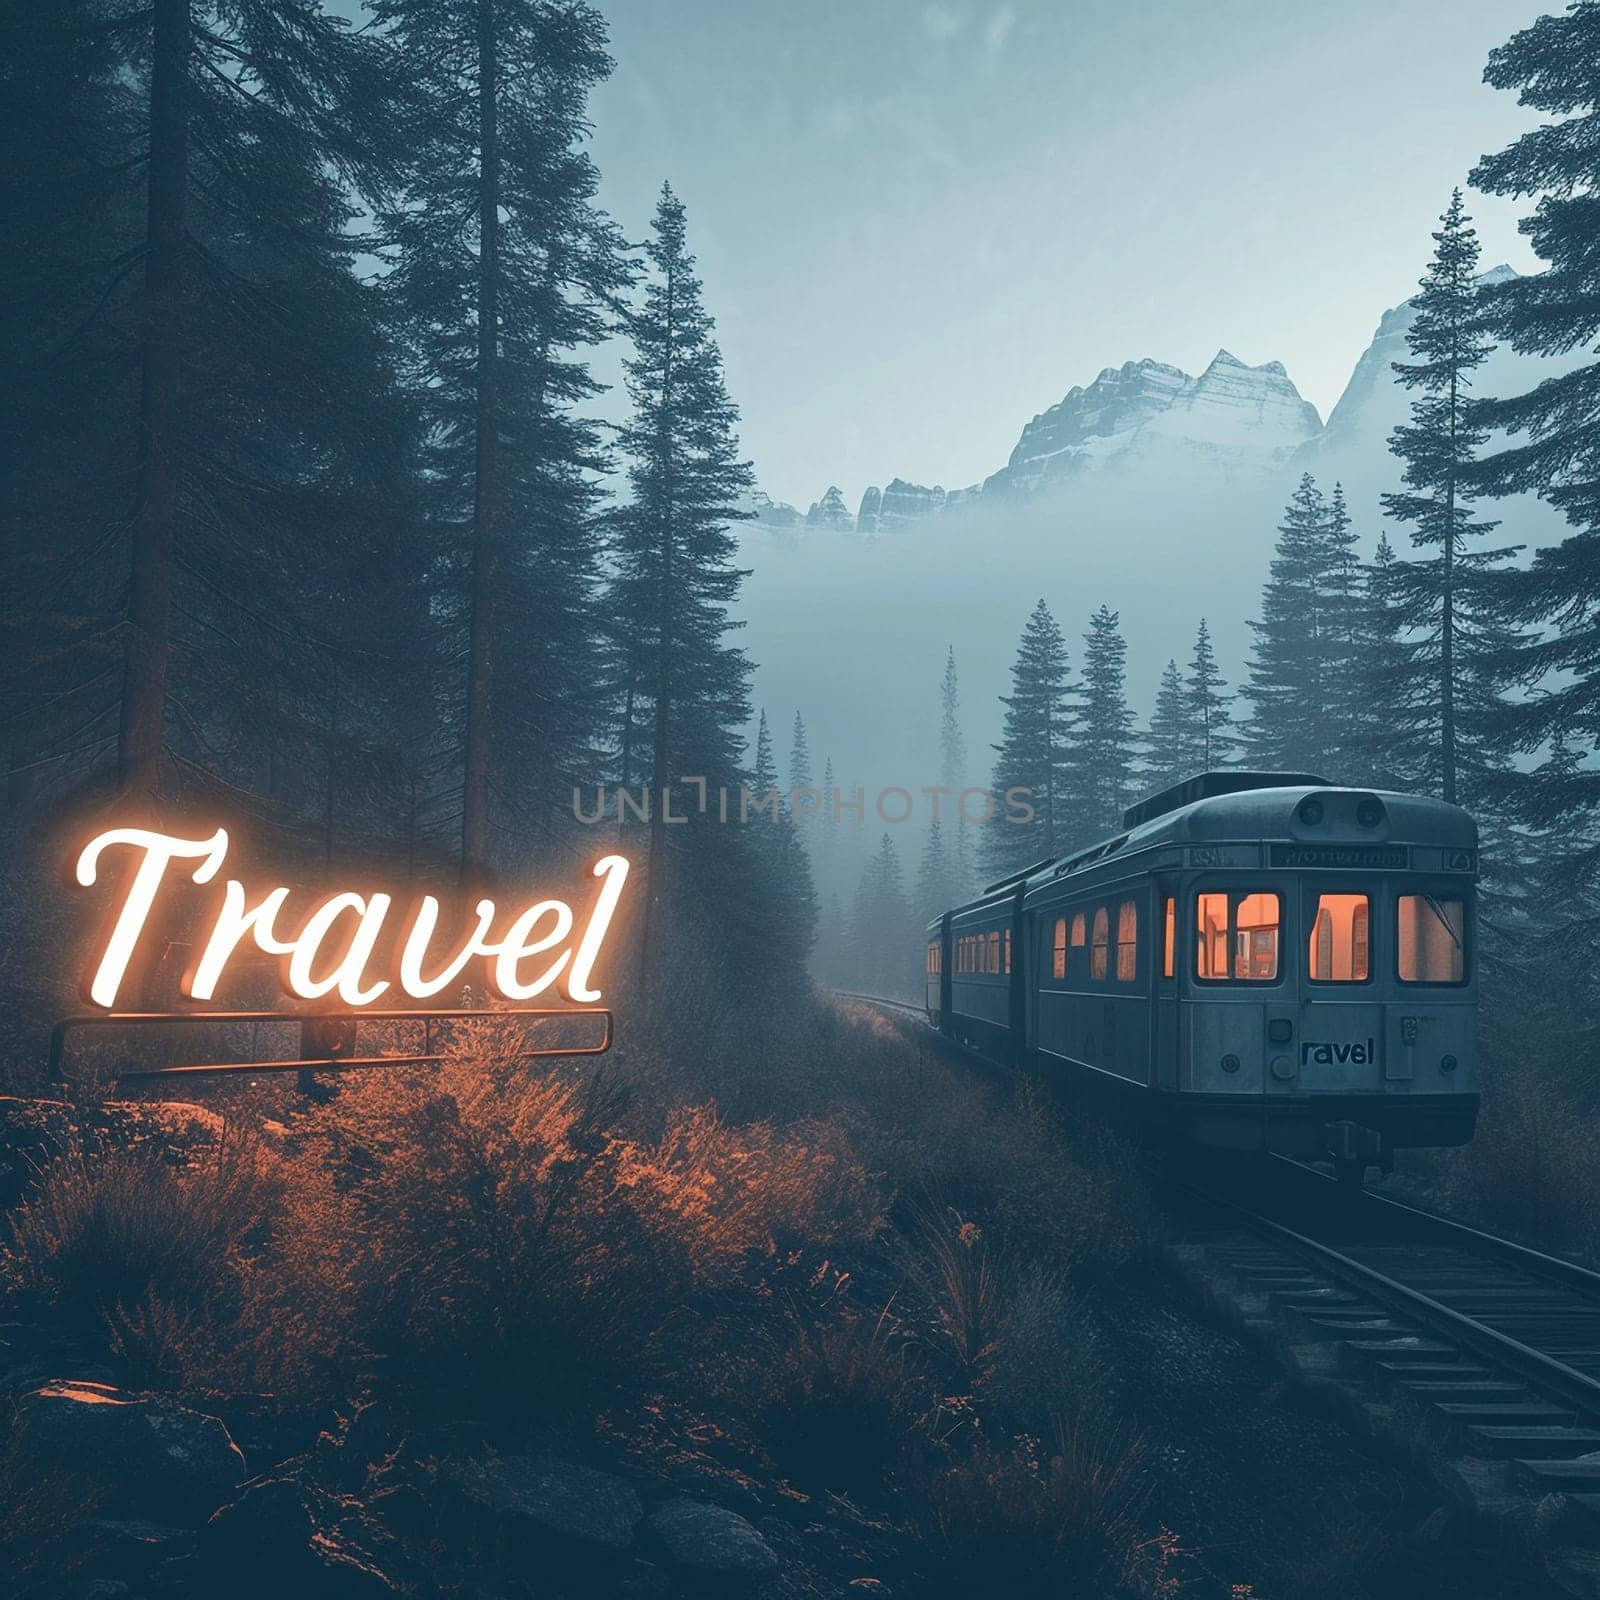 A beautiful travel logo with a train in the forest. High quality illustration